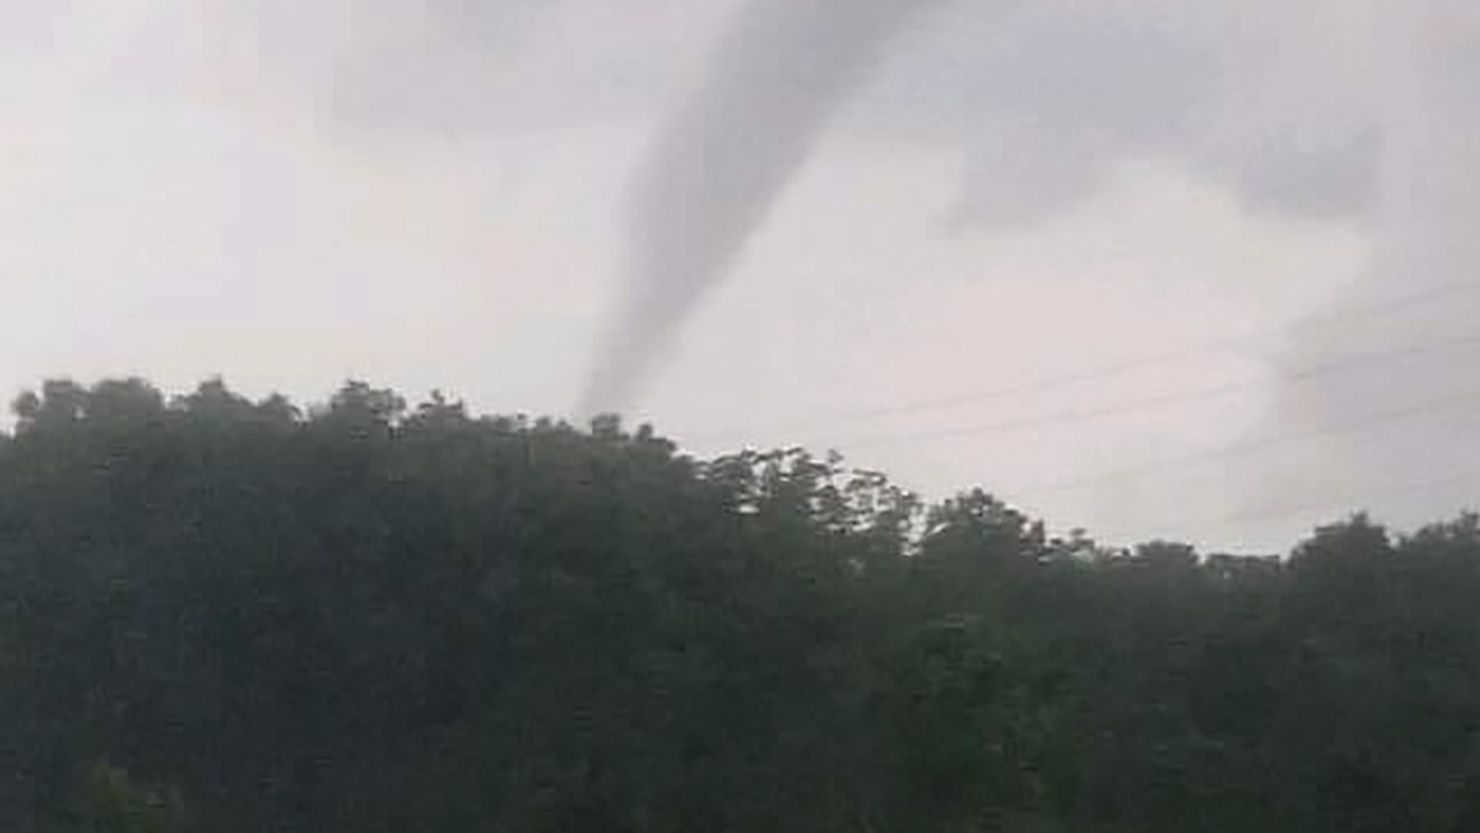 A  funnel cloud touches down near South Bend, Indiana.